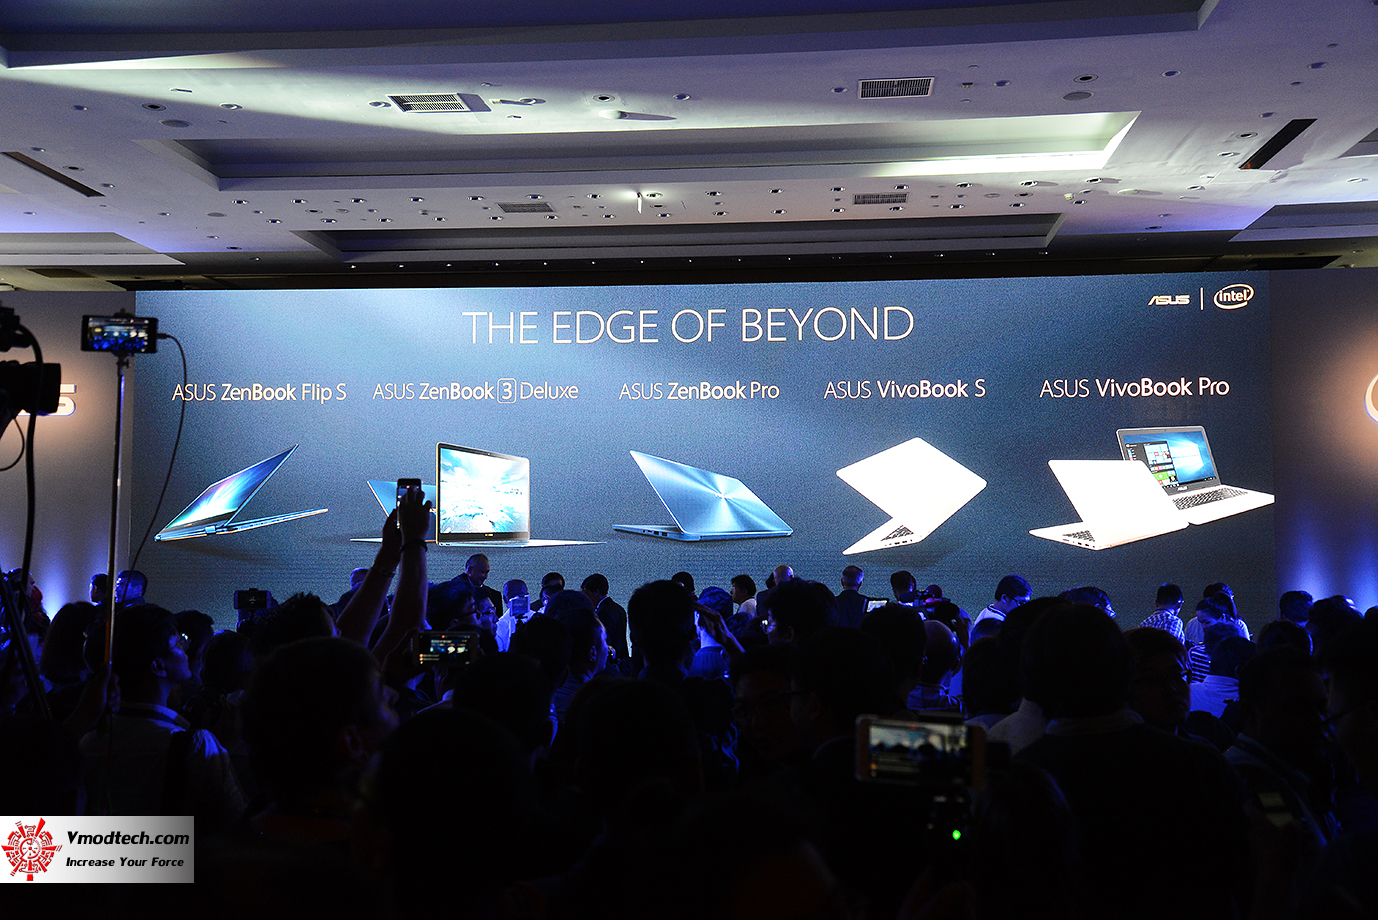 dsc 9102 ASUS THE EDGE OF BEYOND COMPUTEX 2017